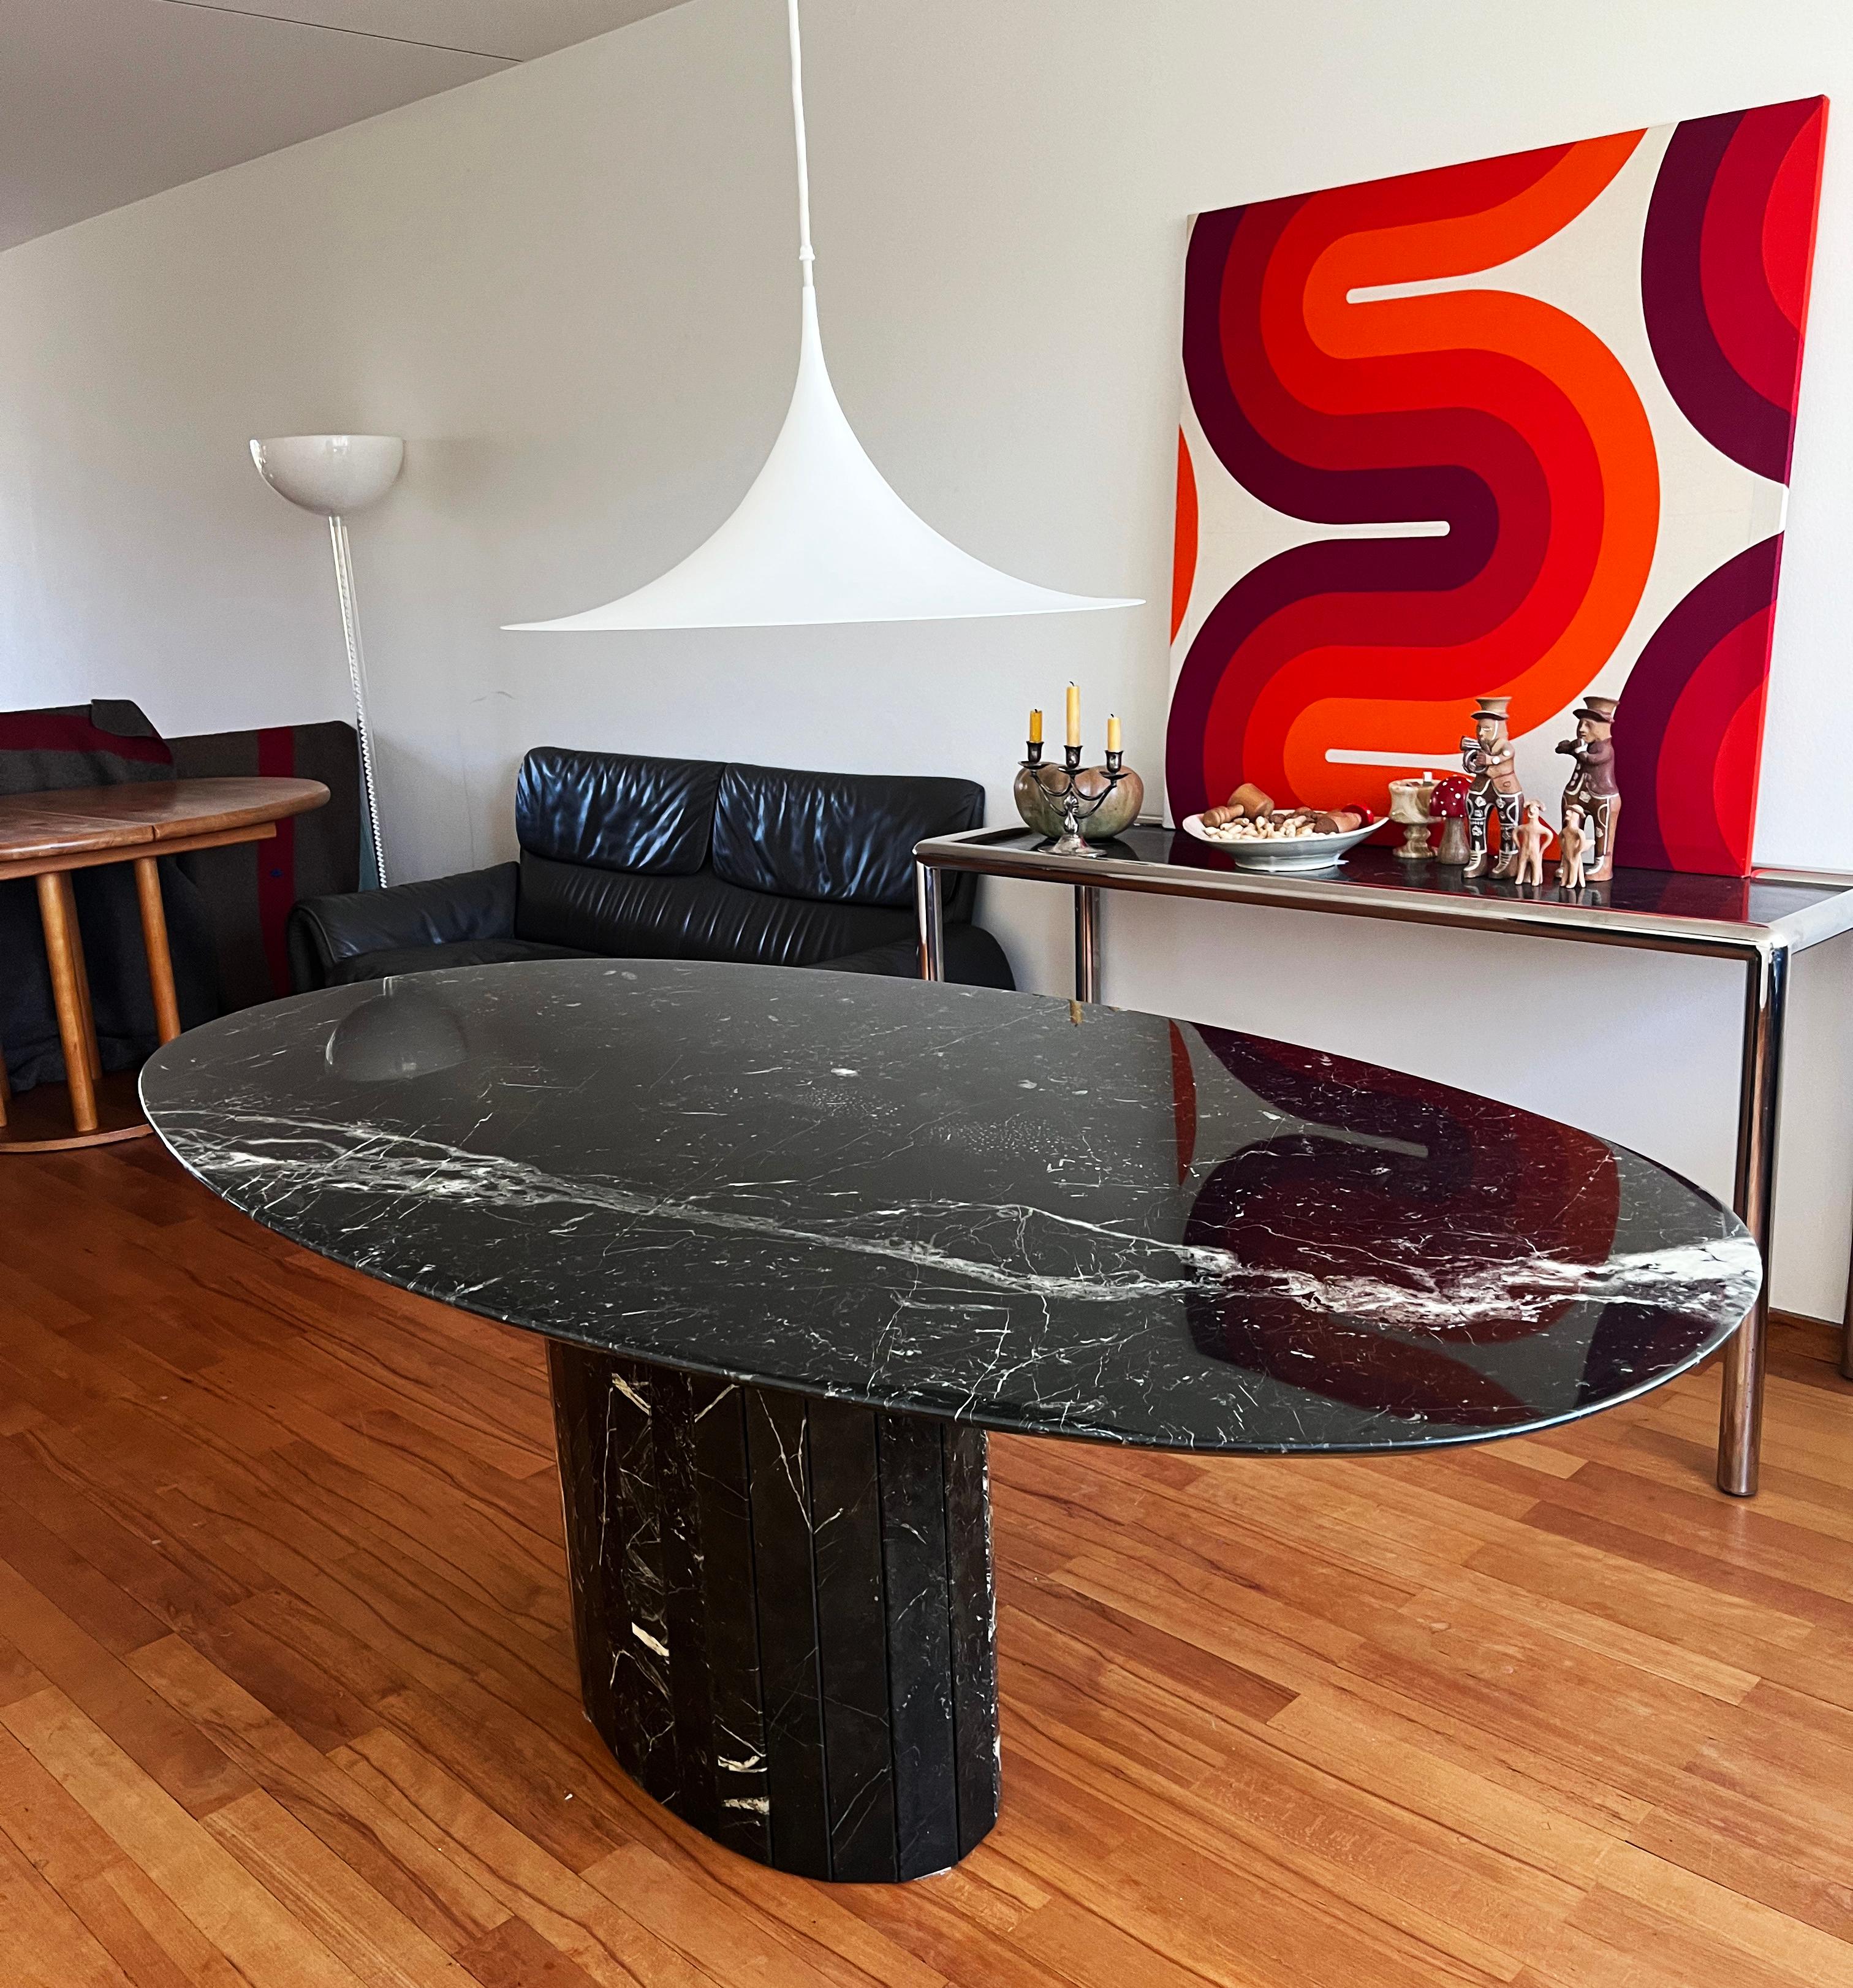 Stunning, beautifully veined post modern Solid substantial Italian marble dining table. Beautiful Oval table top shape with an Iconic base and an overall beautiful minimalistic, geometric shape! Beveled edges, and smooth wonderful marble grained